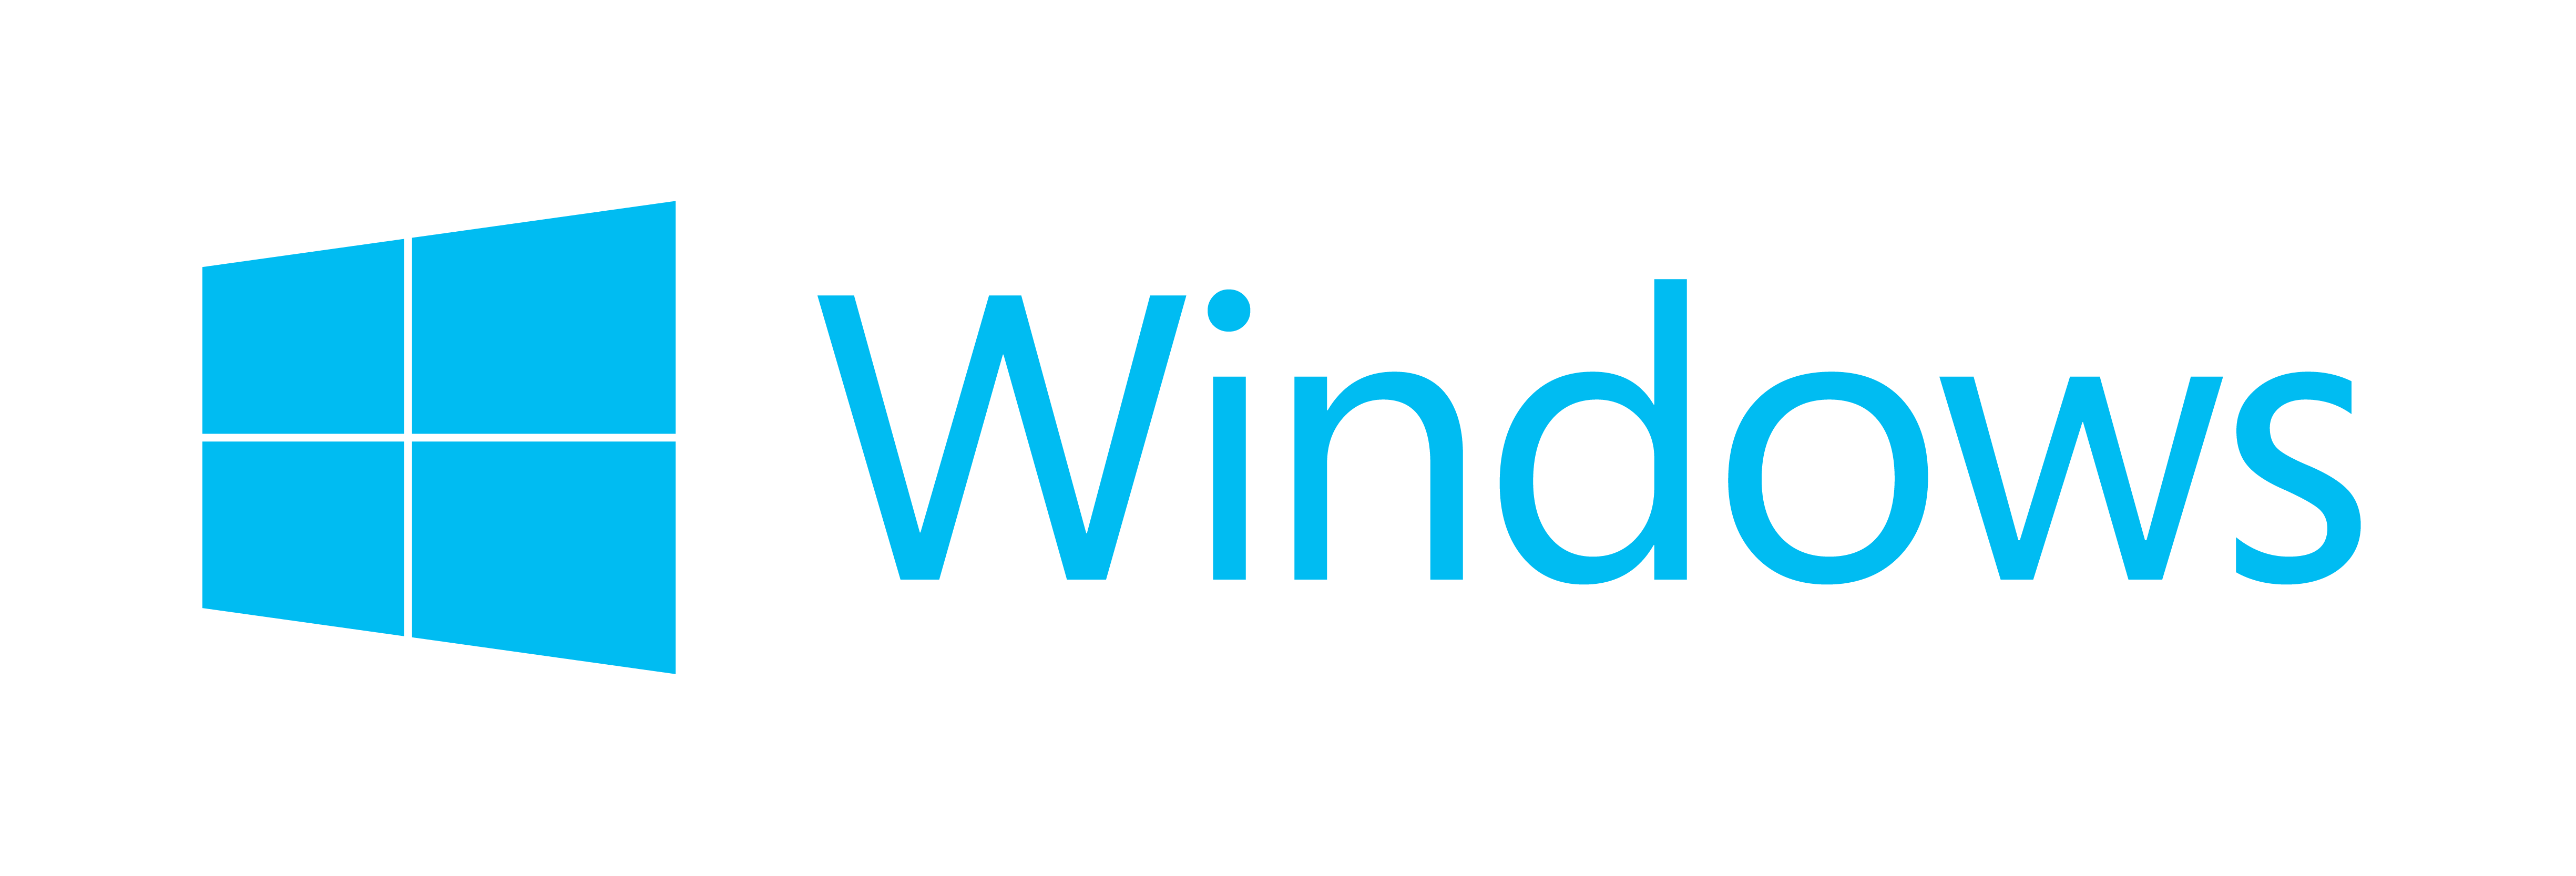 Microsoft Windows Png Clipart PNG Image